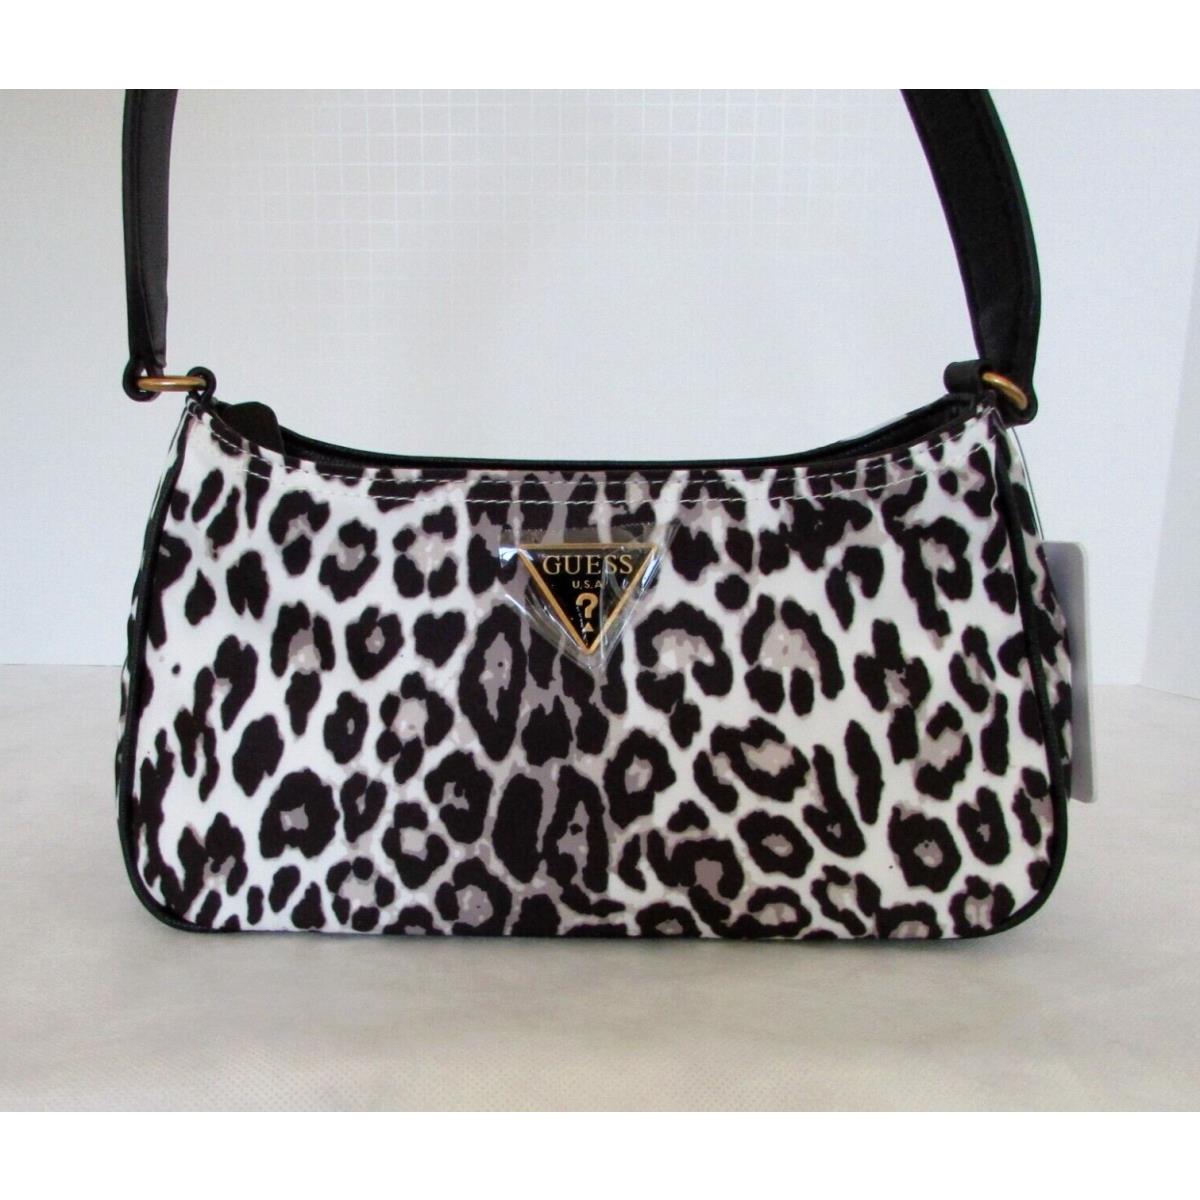 Shop Guess Animal Print Bags up to 50% Off | DealDoodle